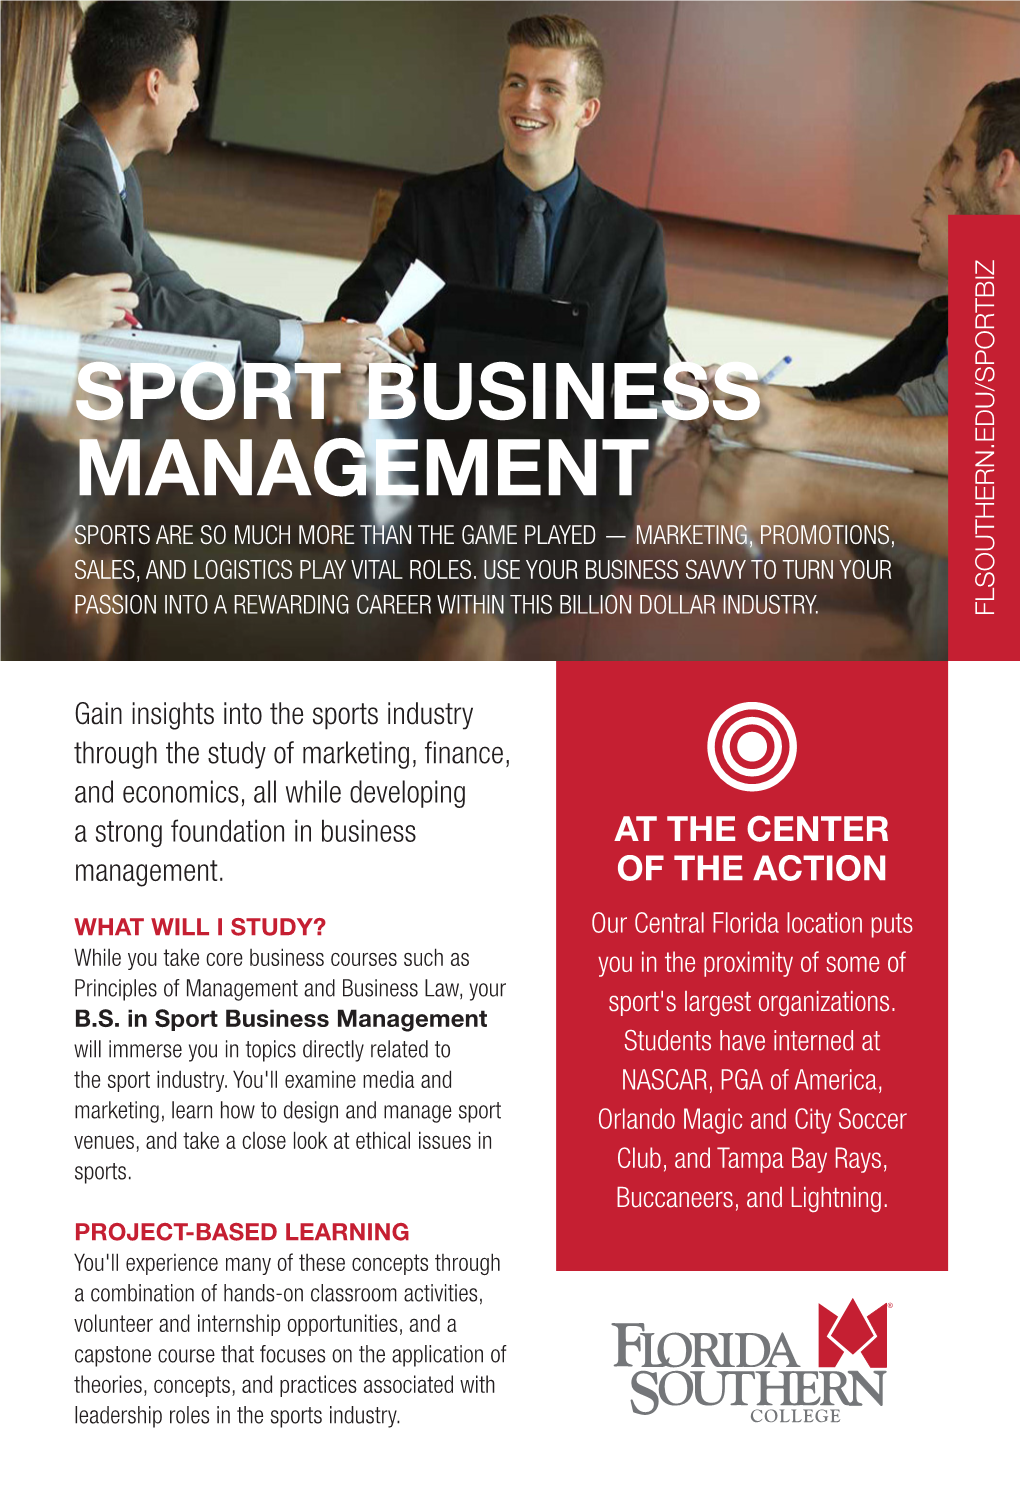 Sport Business Management Sports Are So Much More Than the Game Played — Marketing, Promotions, Sales, and Logistics Play Vital Roles